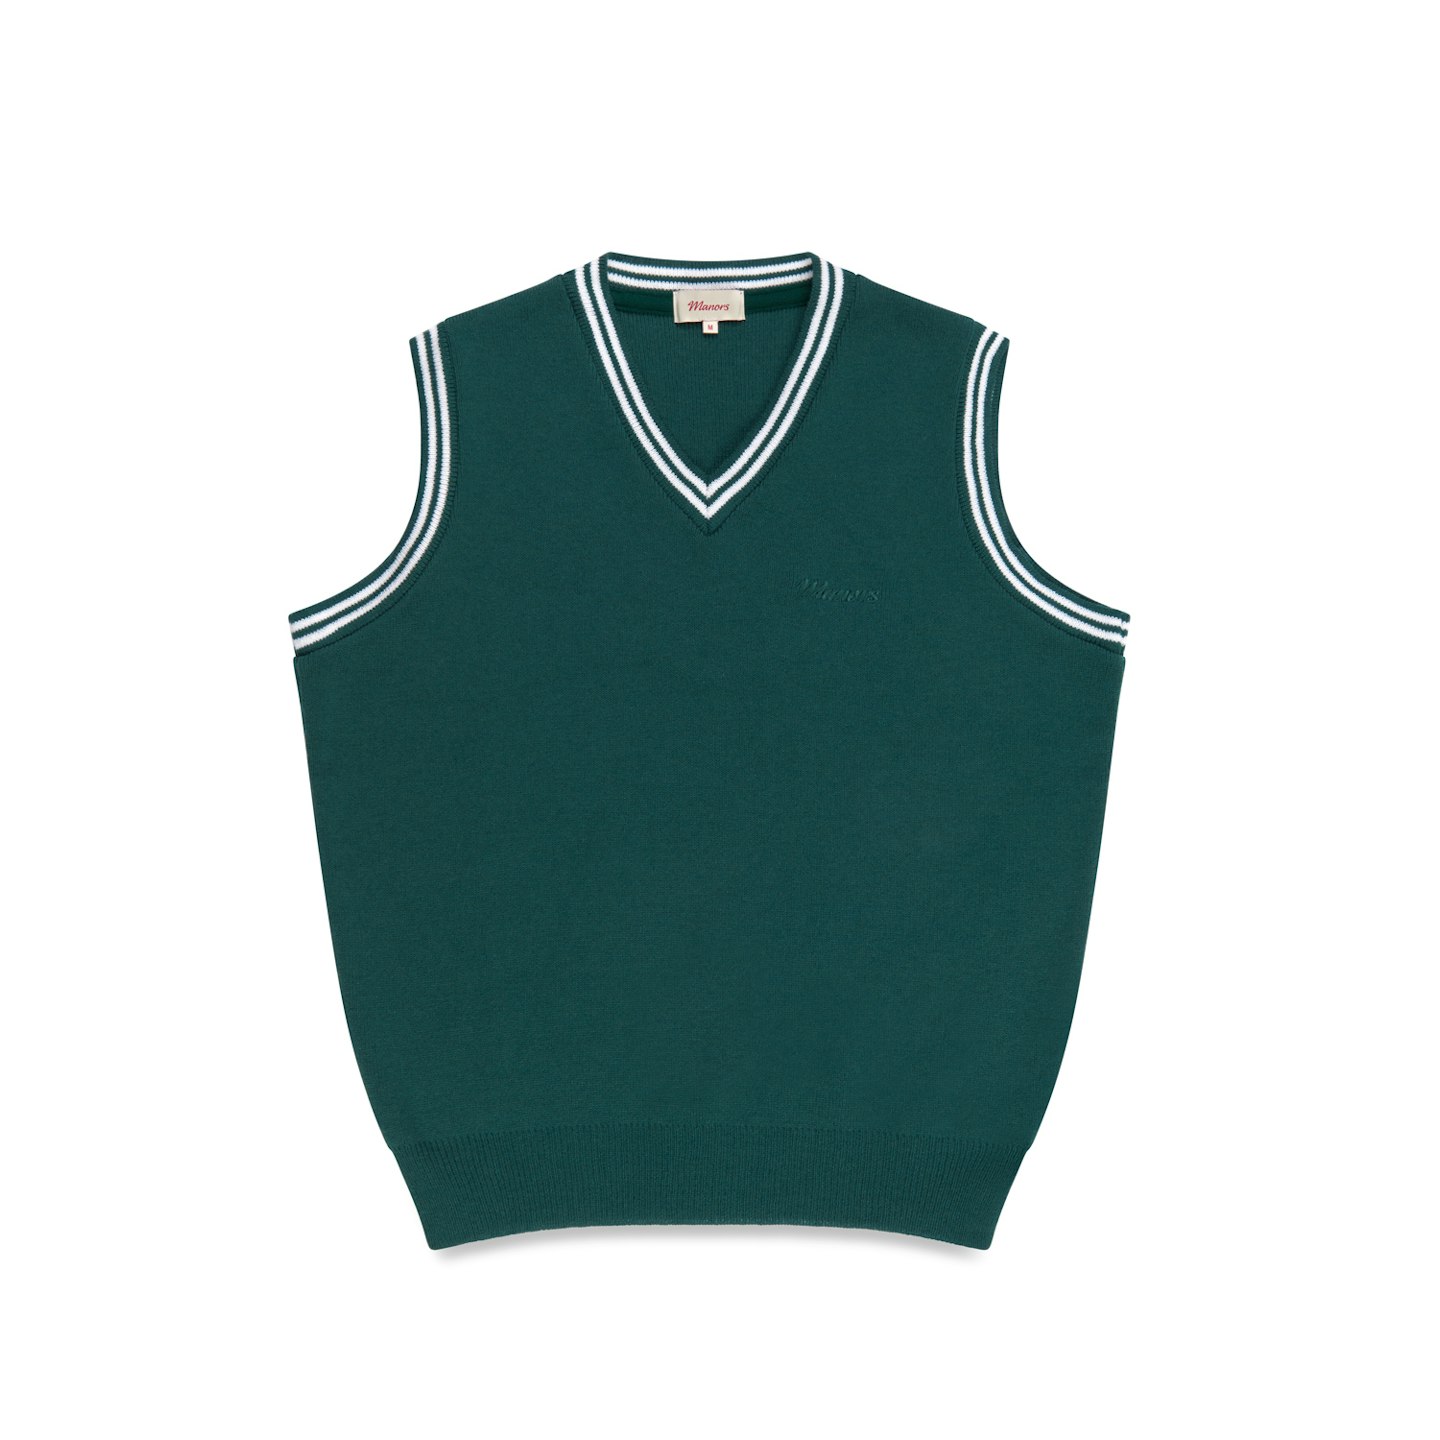 The Best Varsity Pieces - Manors Golf